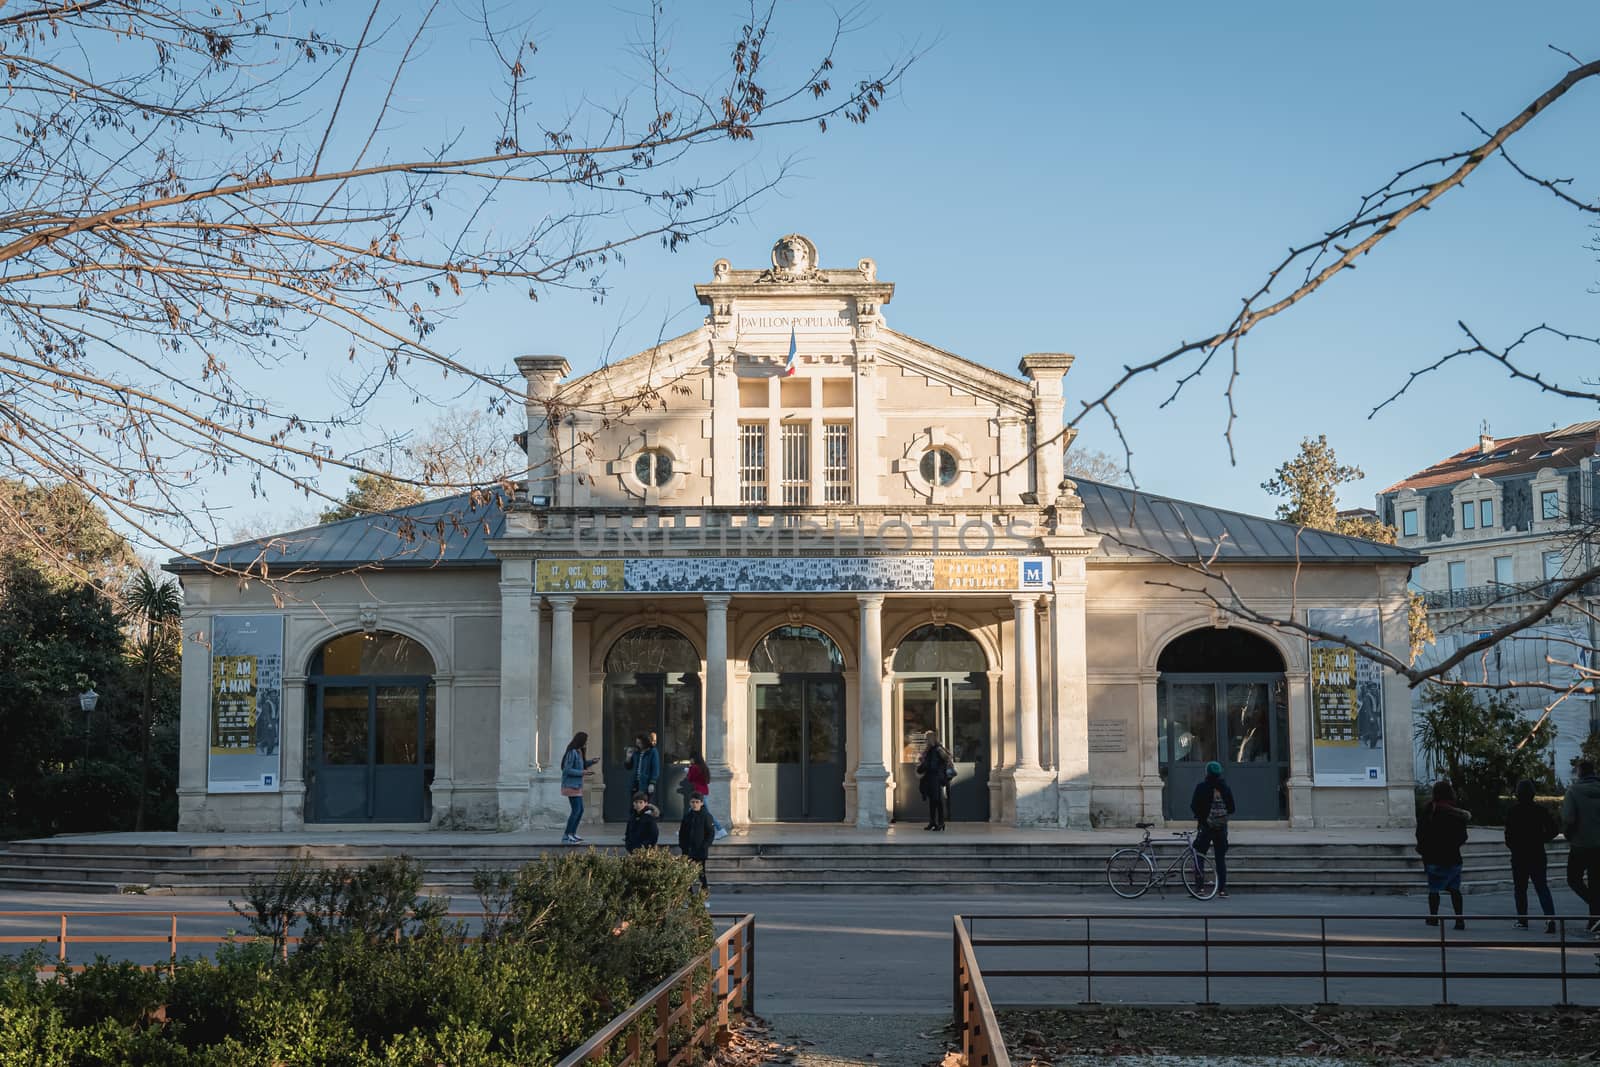 Montpellier, France - January 2, 2019: architectural detail of the popular pavilion (Pavillon Populaire) next to the Place de la Comedie where people pass on a winter day